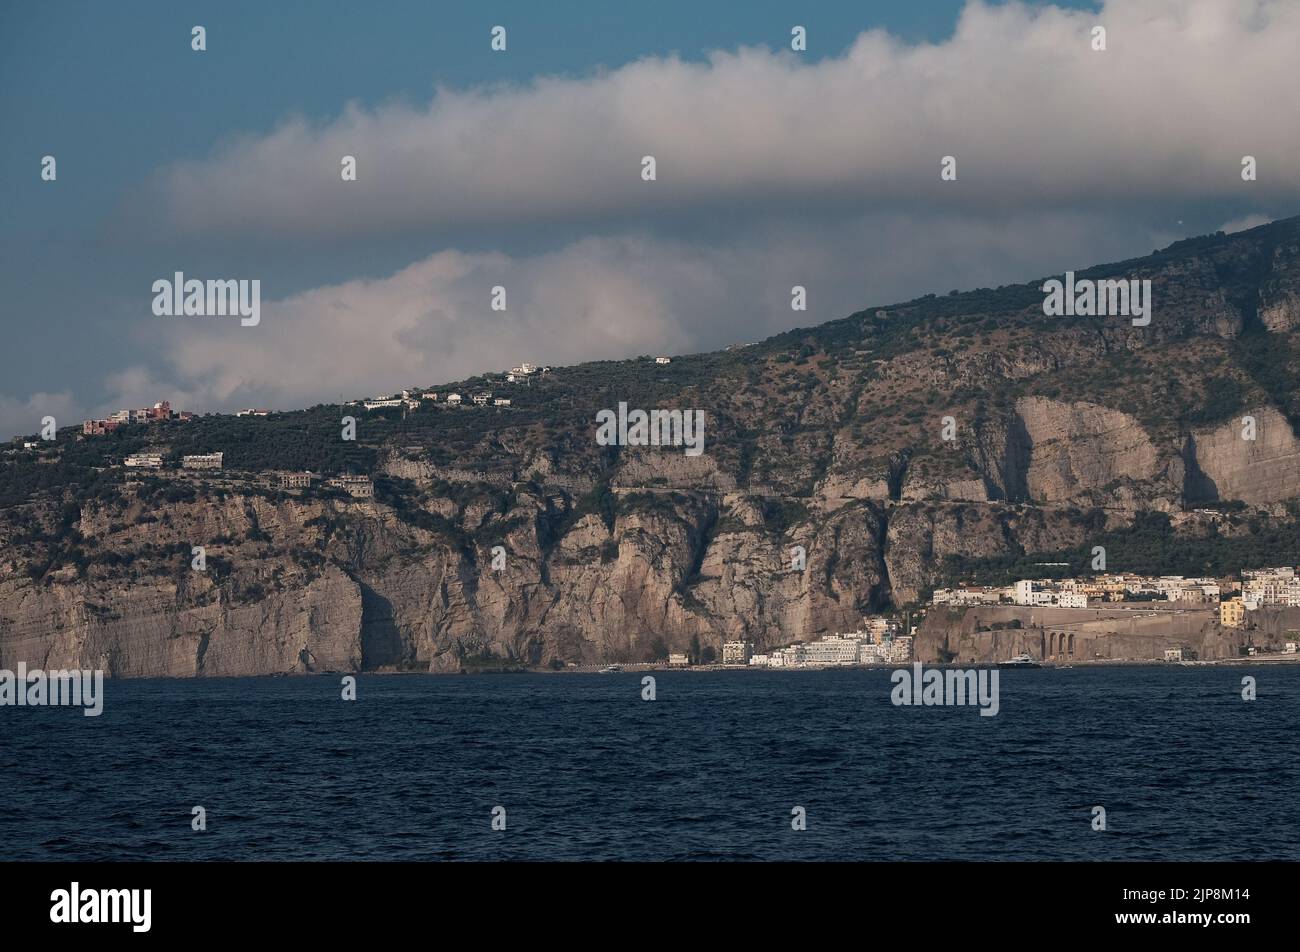 View of part of the Sorrento peninsula with building perched on top looking out into the Bay of Naples. Stock Photo